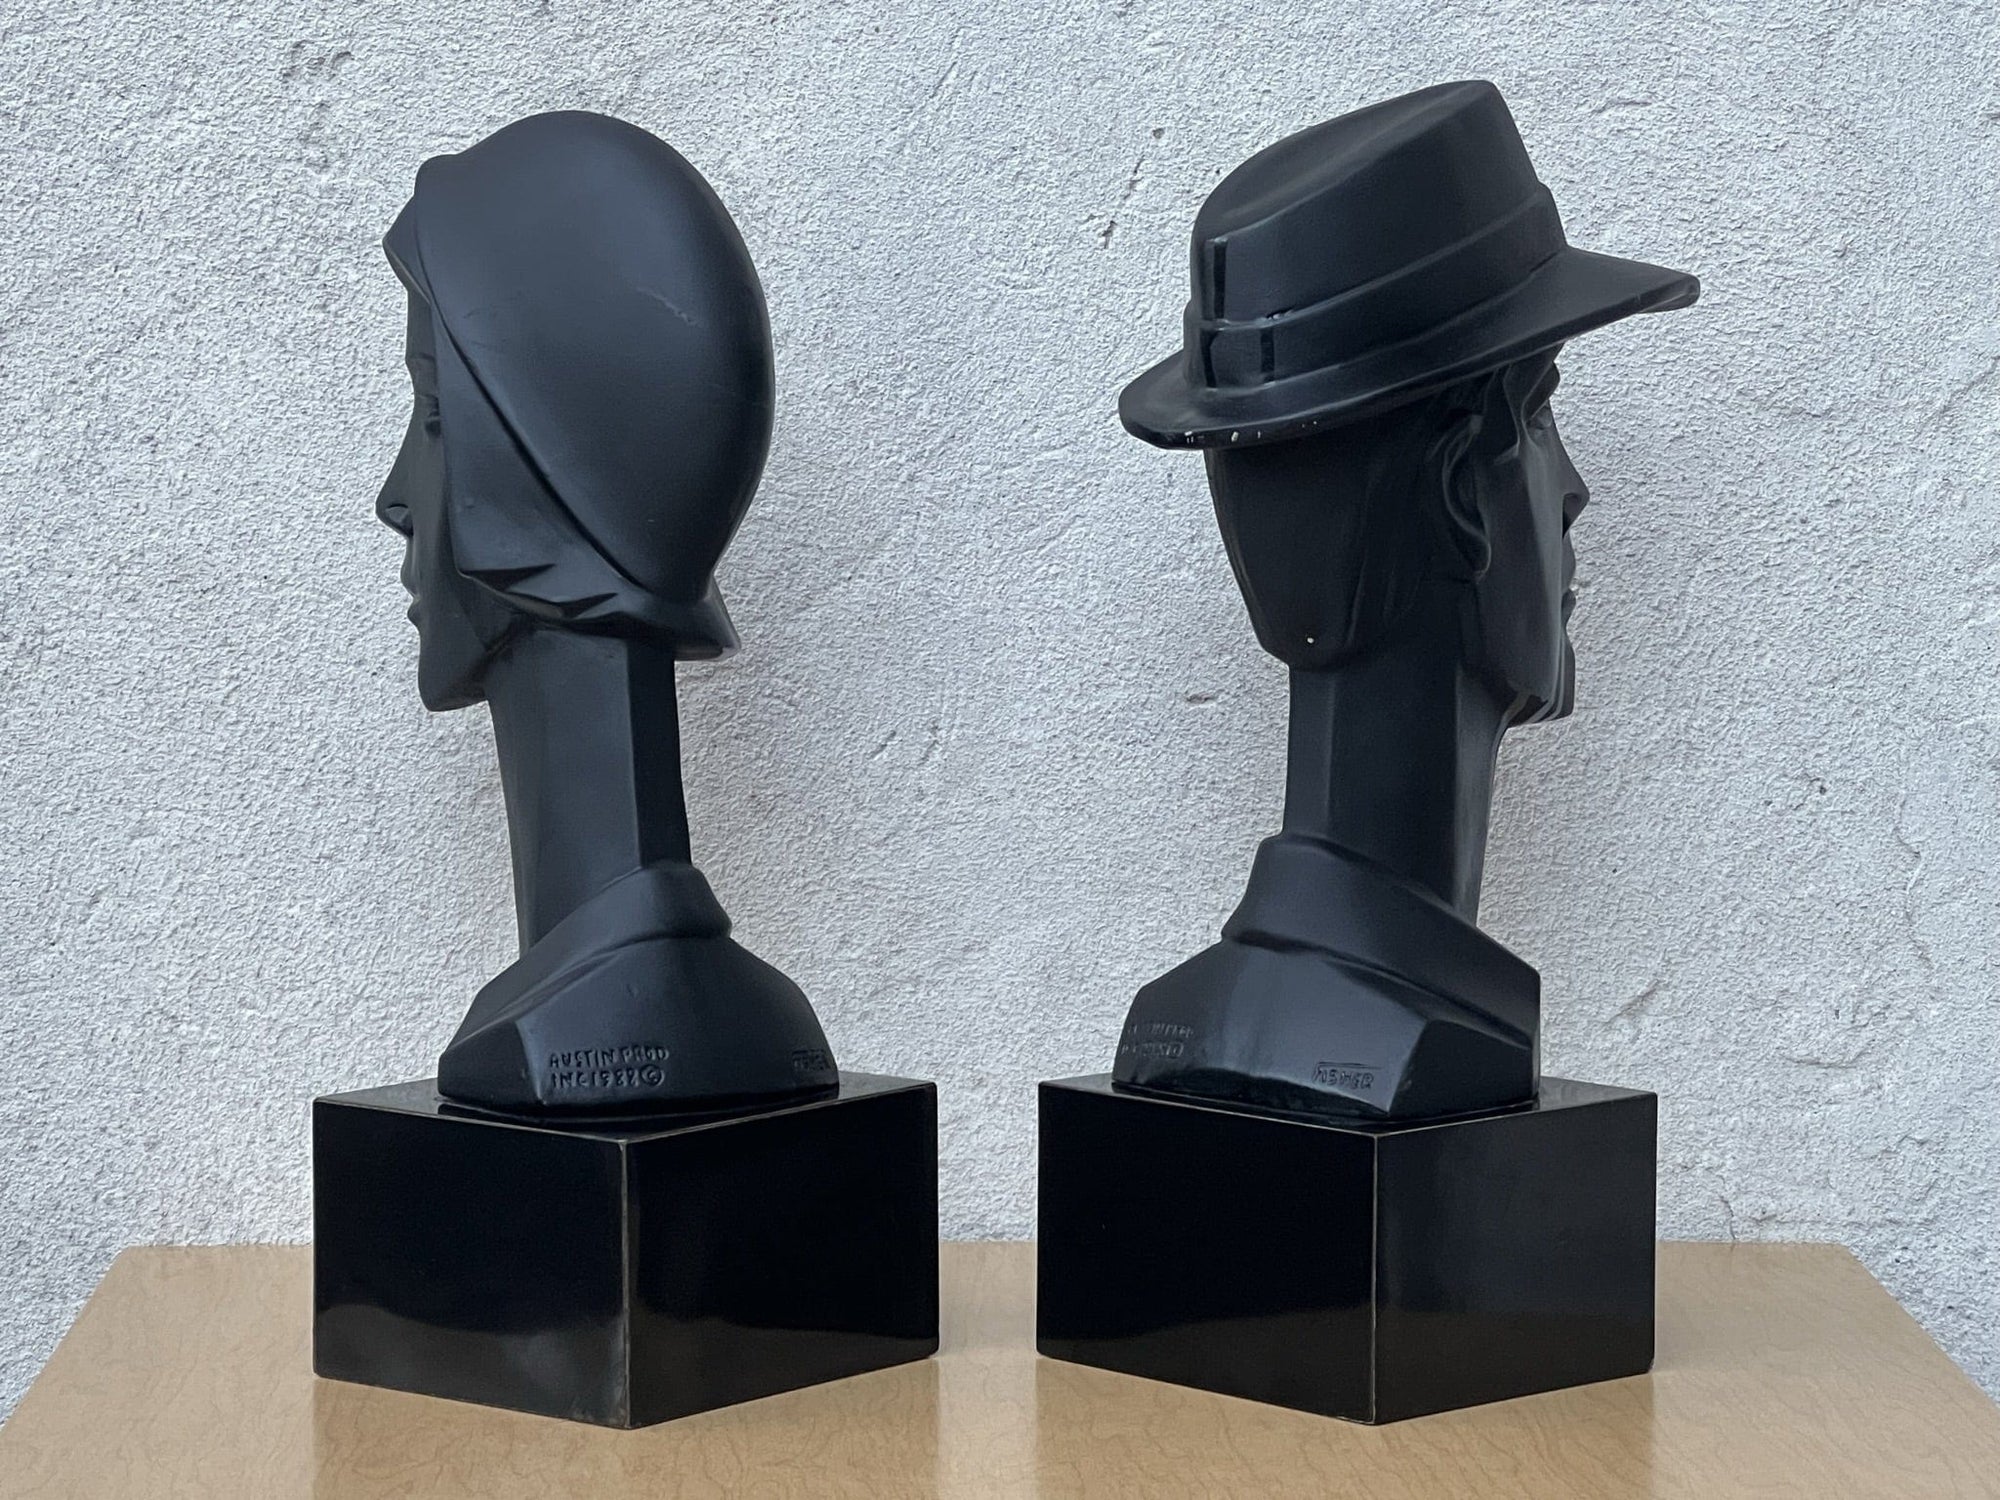 I Like Mike's Mid Century Modern Wall Decor & Art Neo Deco Pair Black Ceramic Man & Woman by David Fisher for Austin Productions, 1988